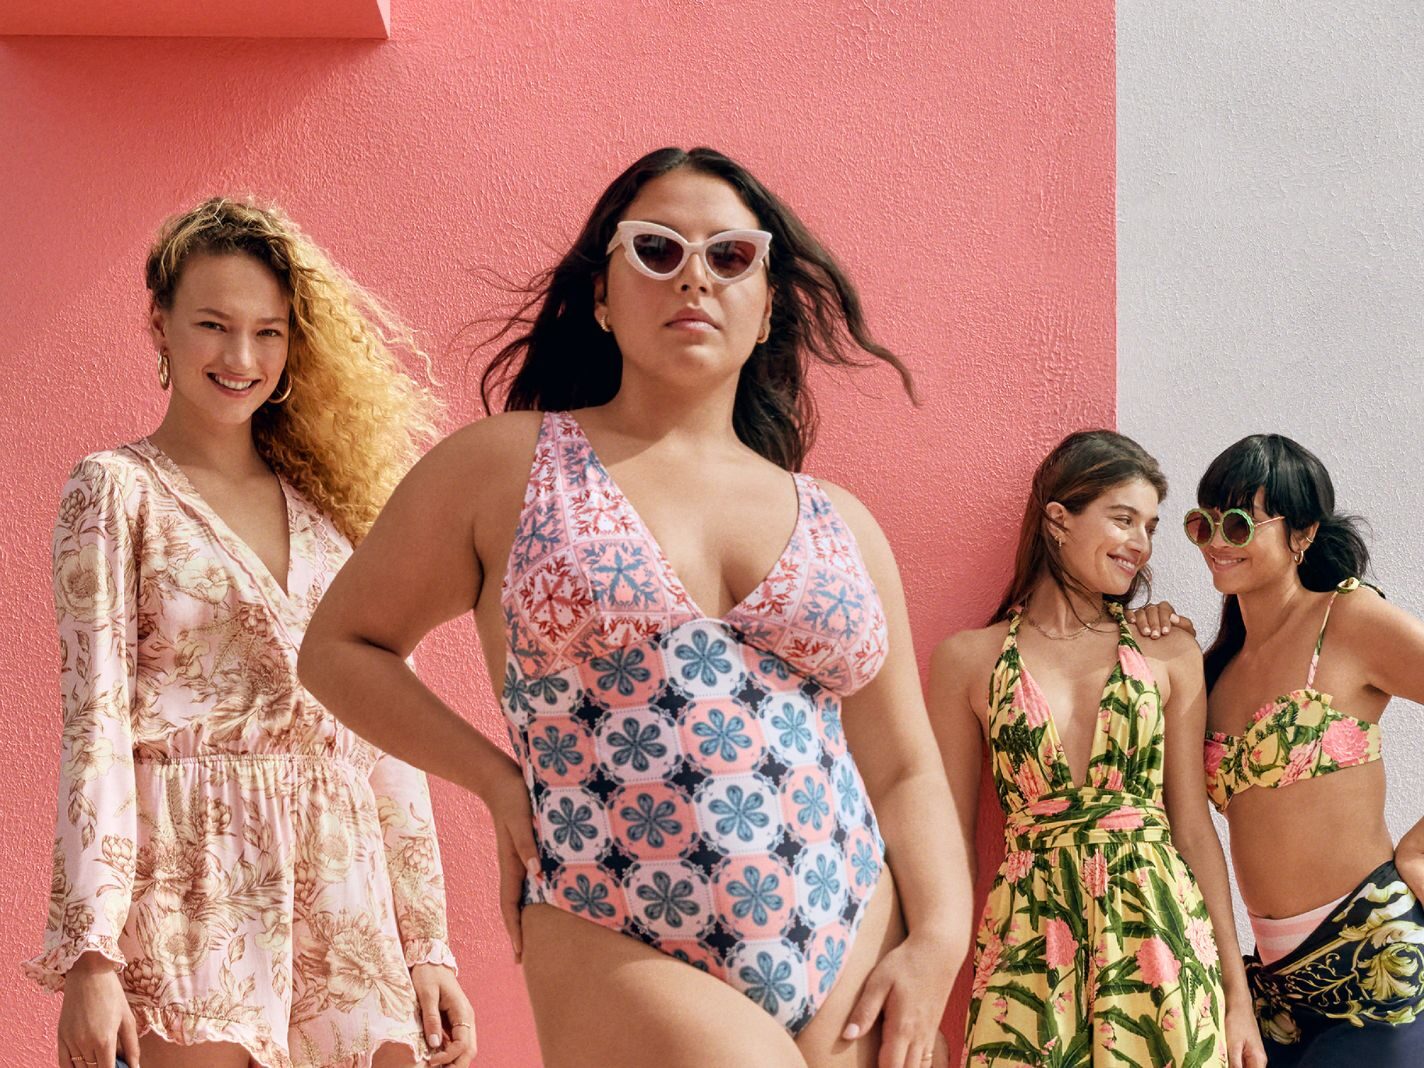 Colombian Brand Agua Bendita Teams Up with Target for Spring Collection